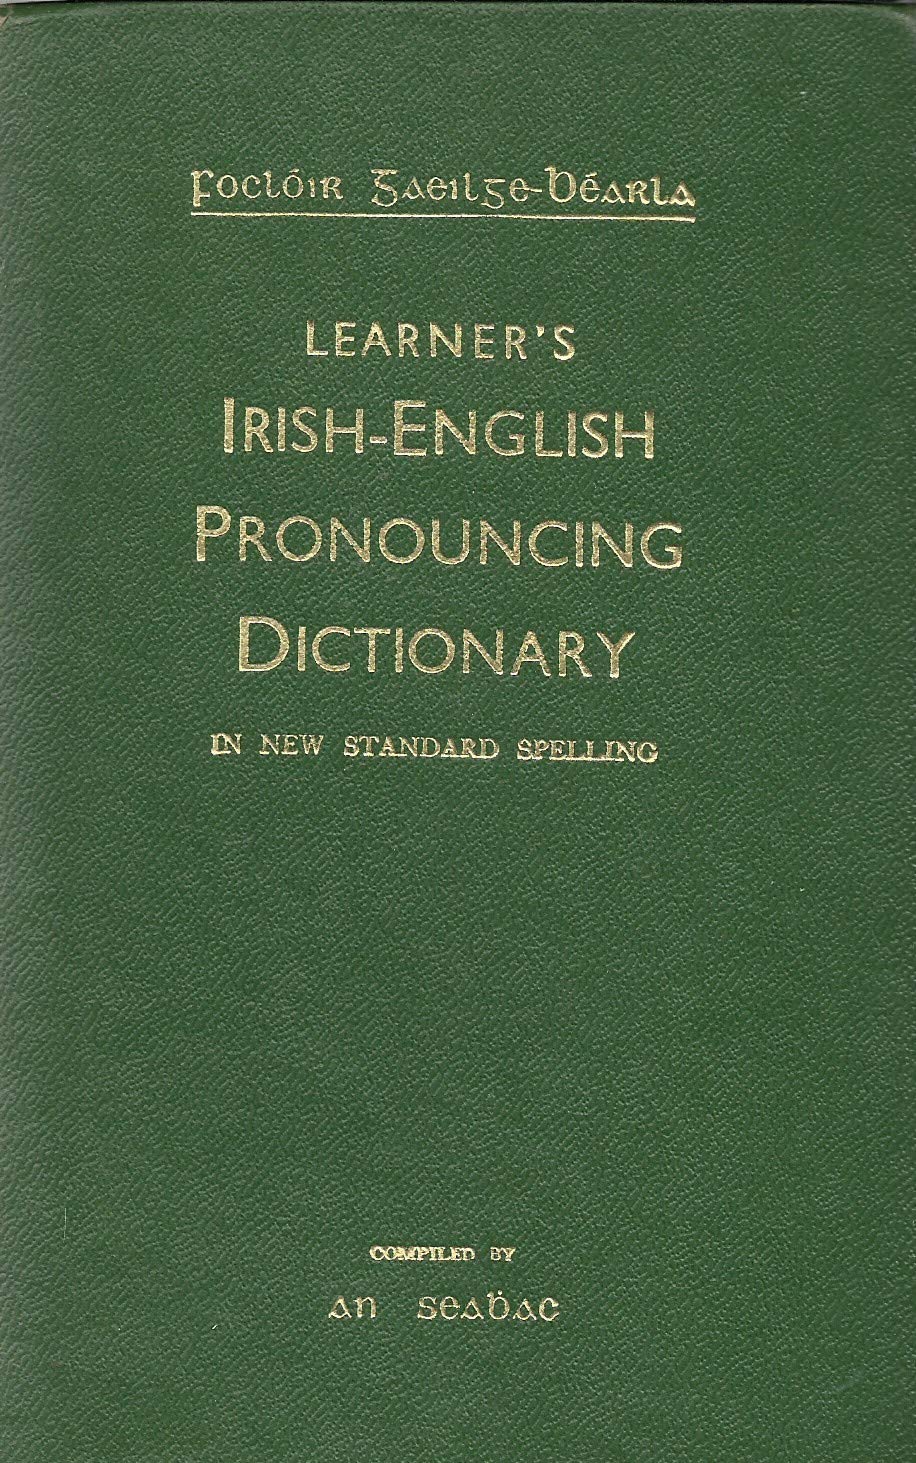 Learner's Irish-English pronouncing dictionary in new standard spelling